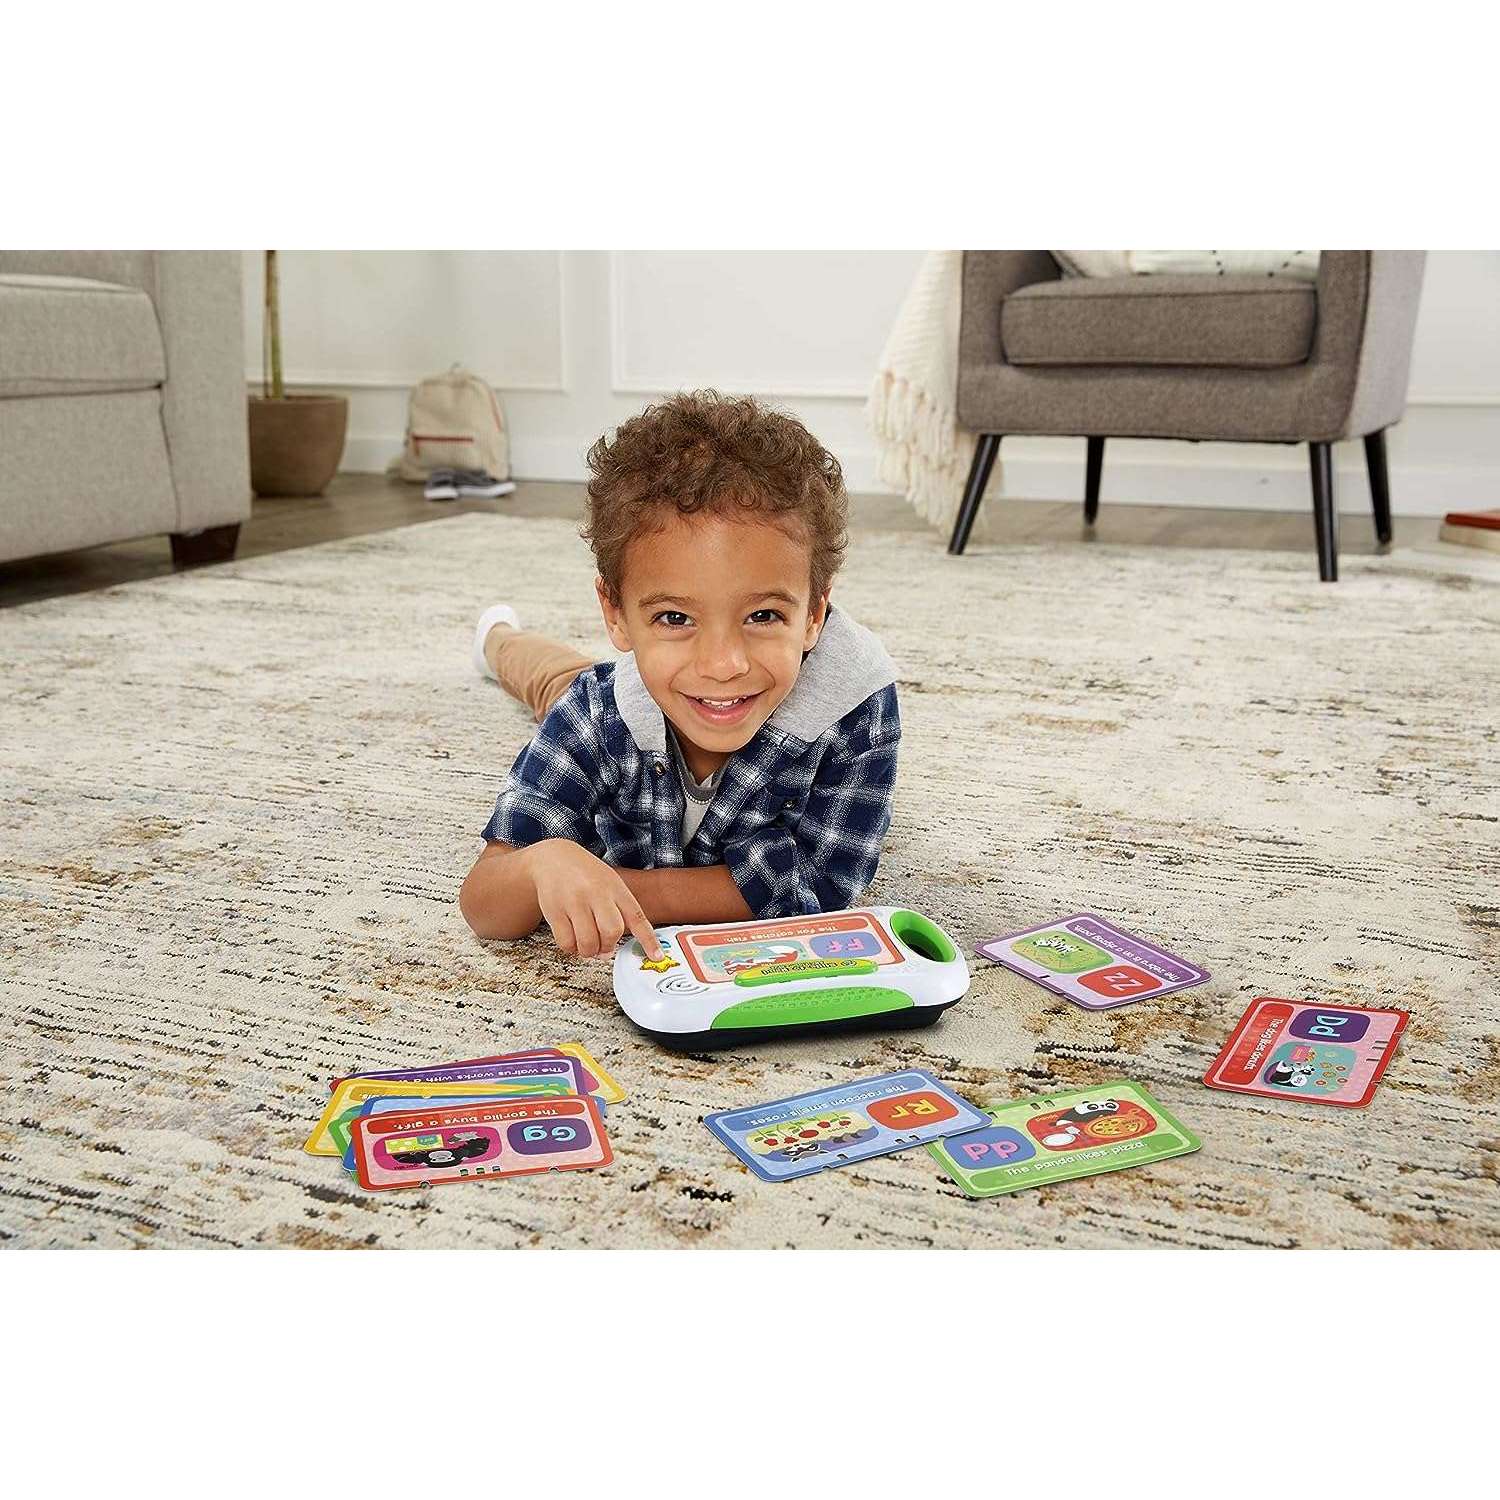 Toys N Tuck:LeapFrog Slide To Read ABC Flashcards,Leap Frog